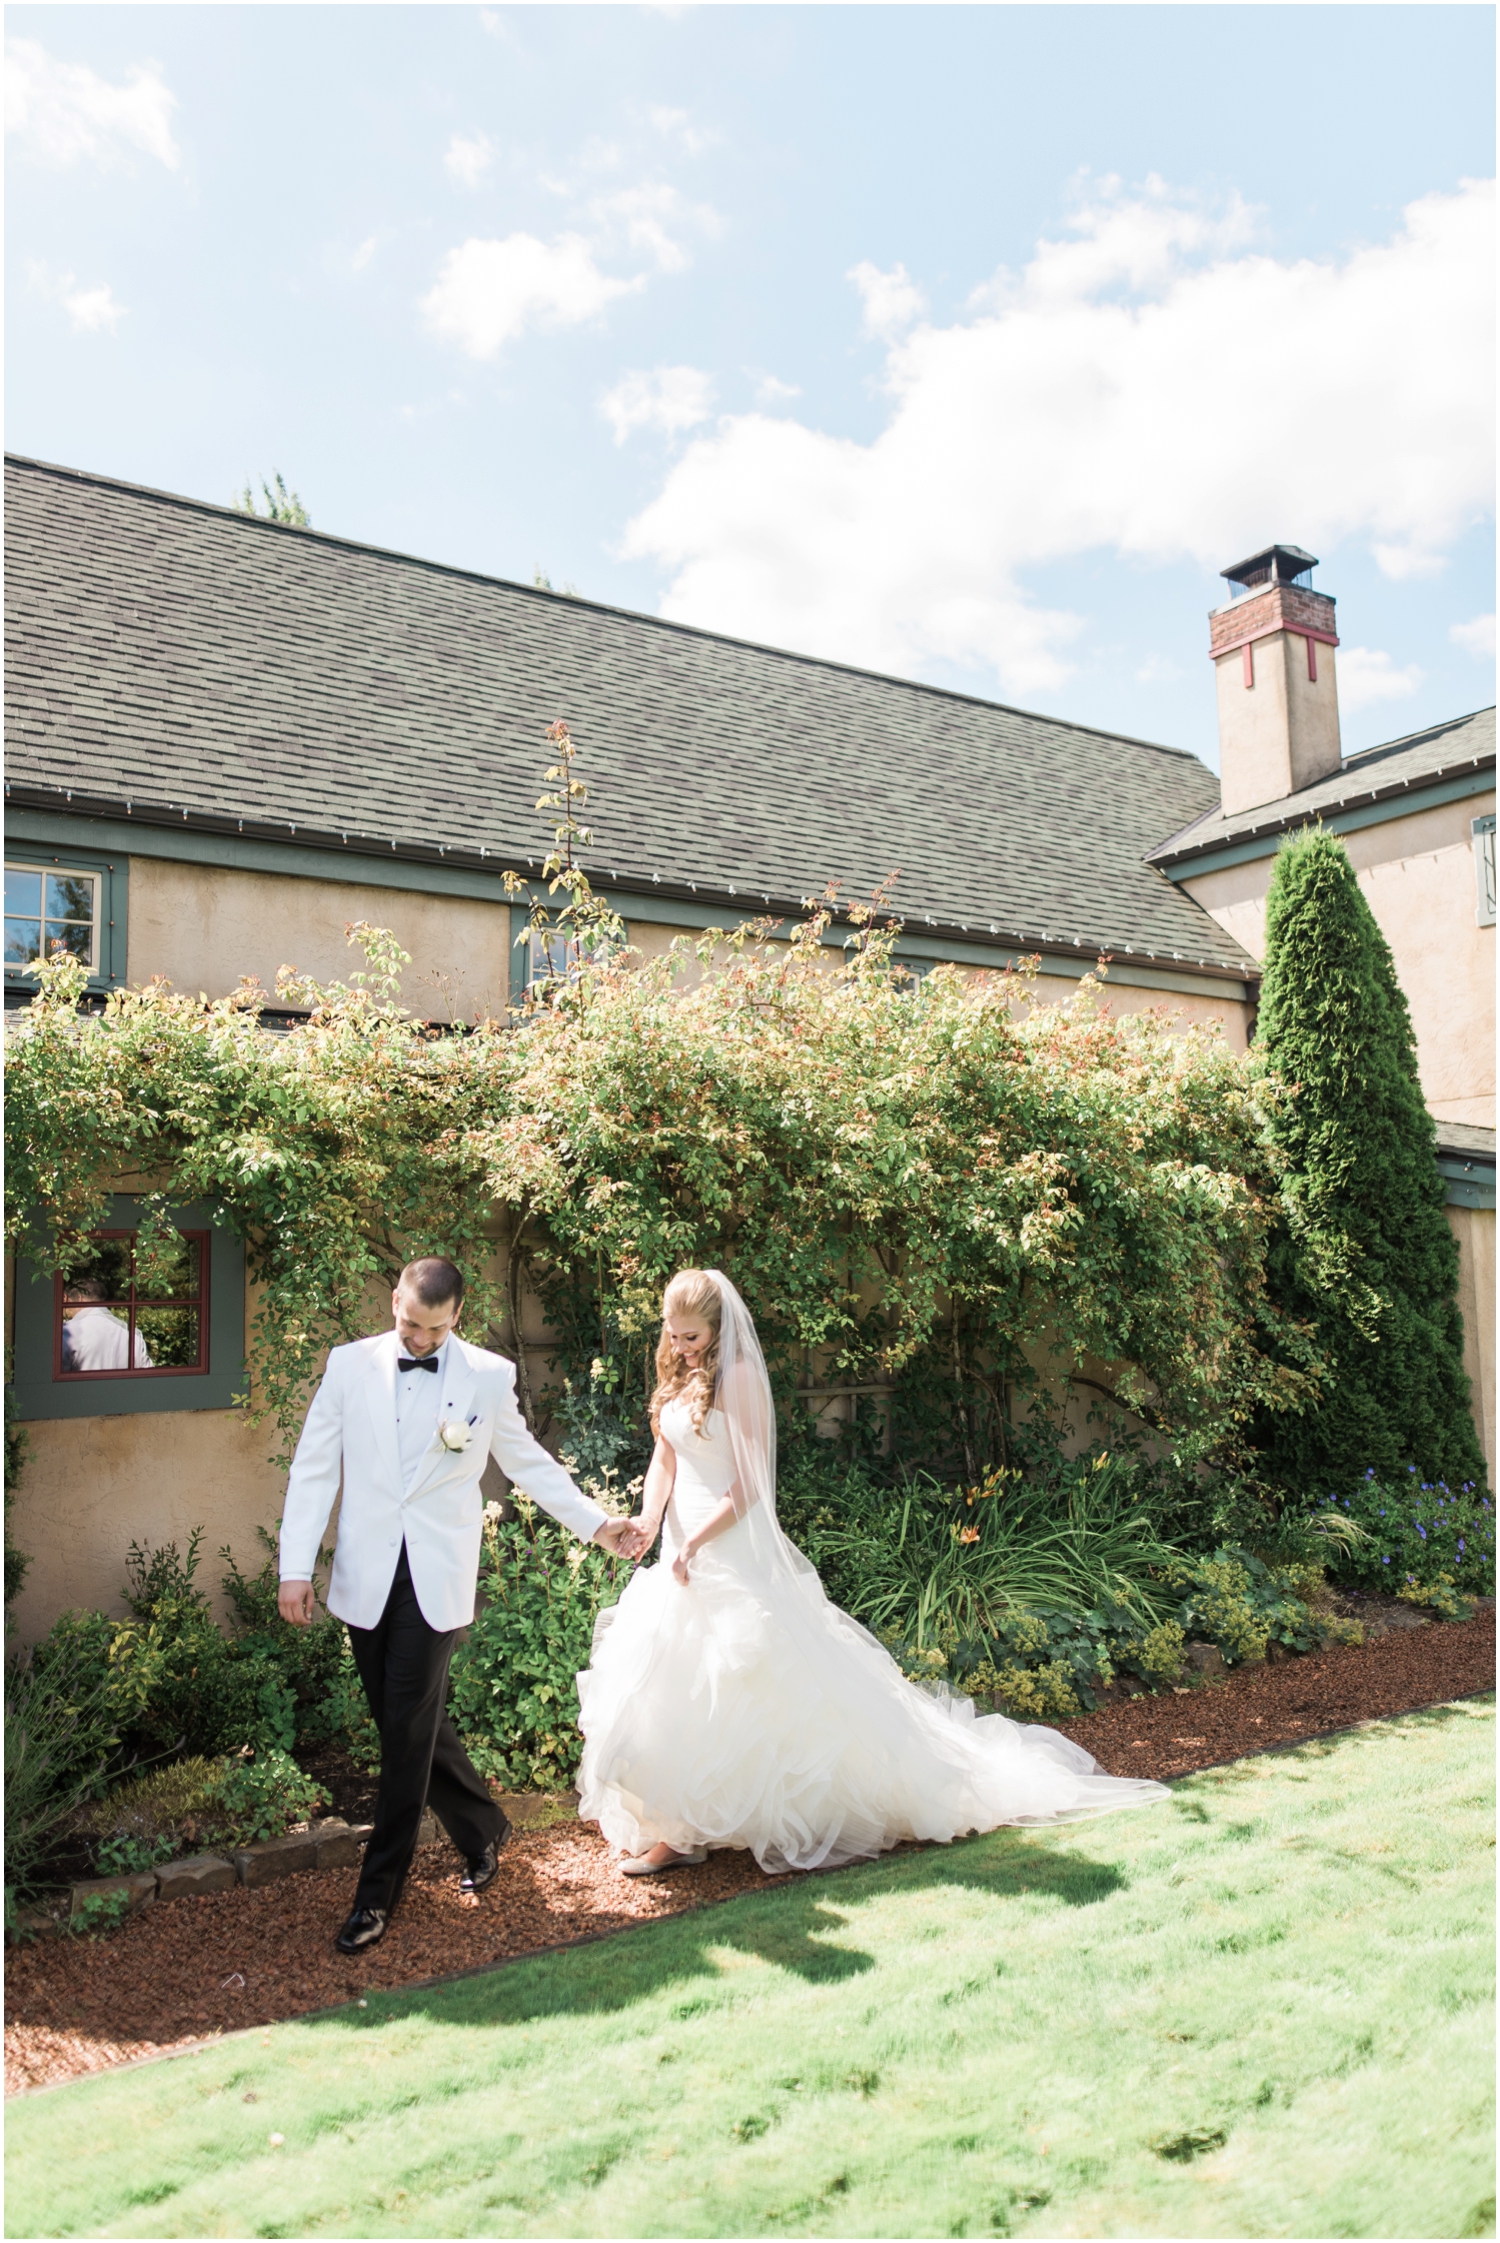 Hannah & Mikes Willows Lodge Wedding. Woodinville wedding Photographer